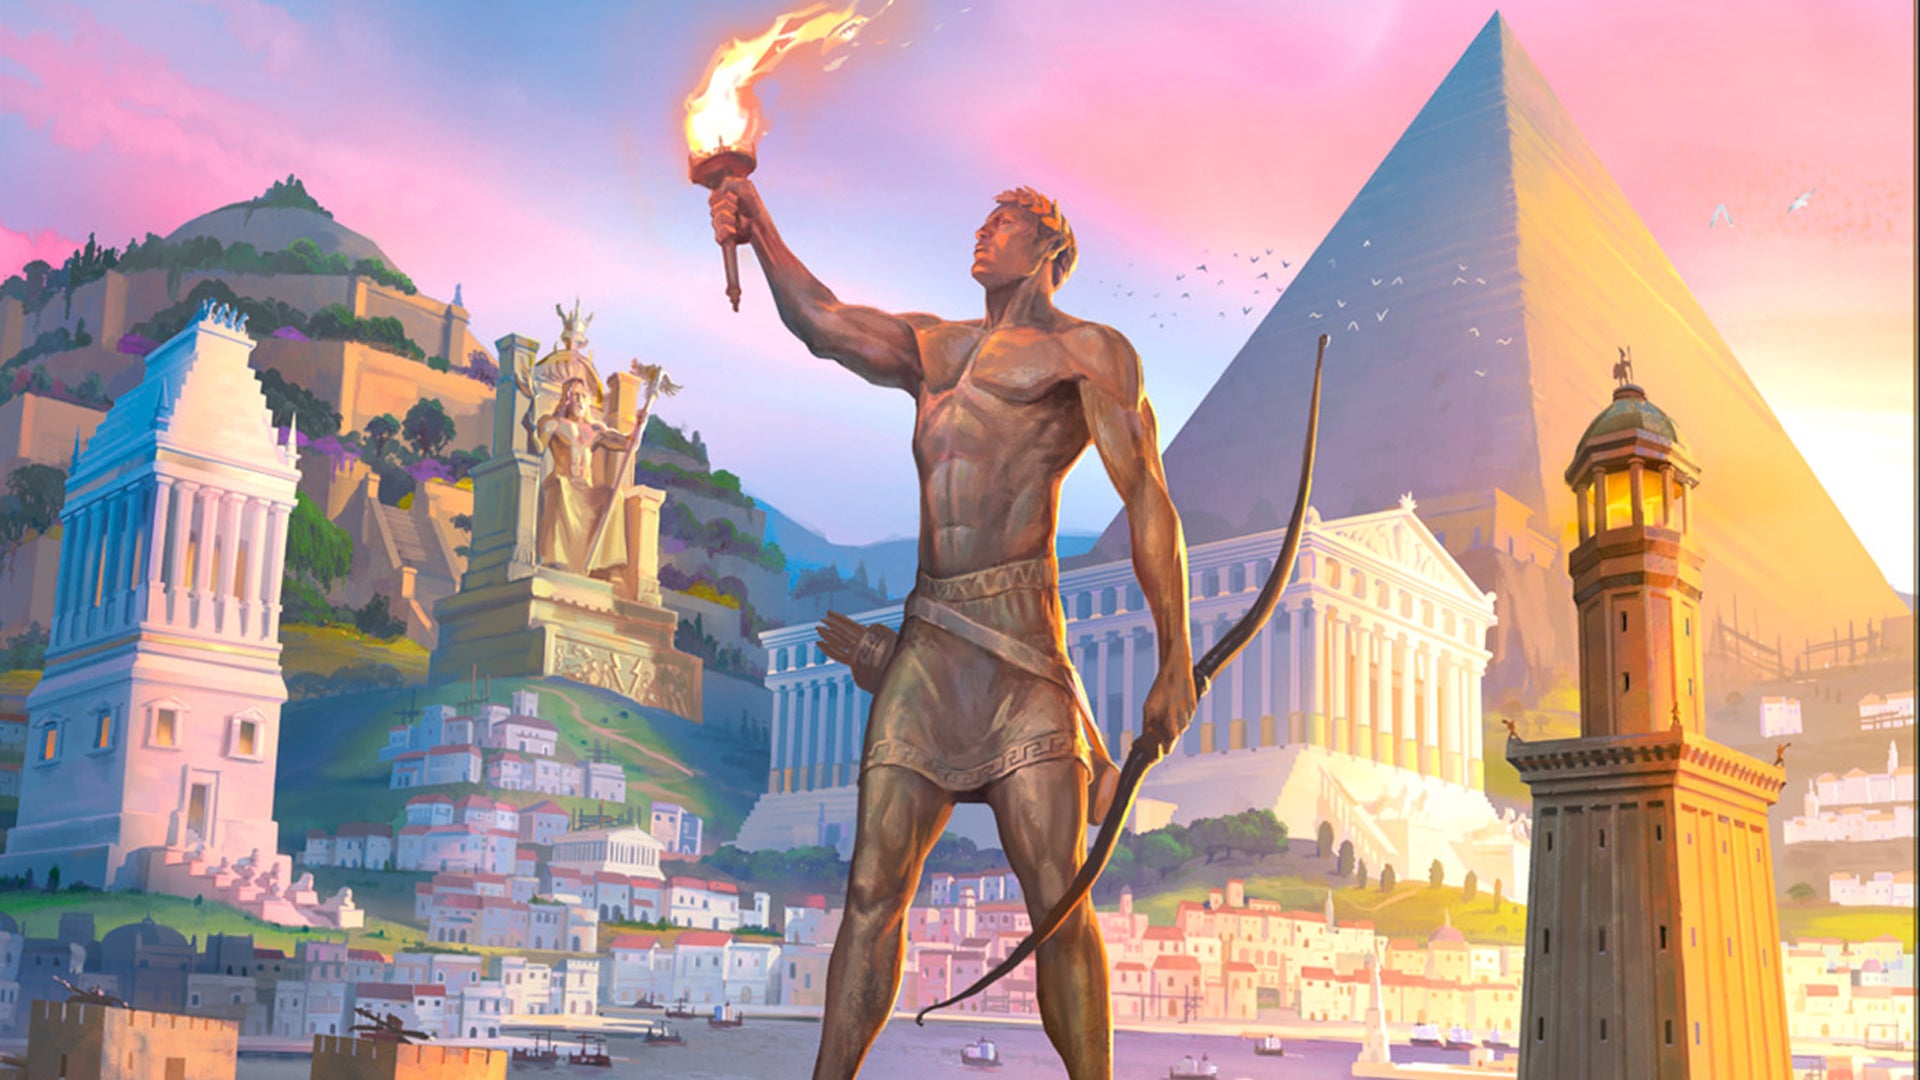 Image for How to play 7 Wonders: board game’s rules, setup and scoring explained